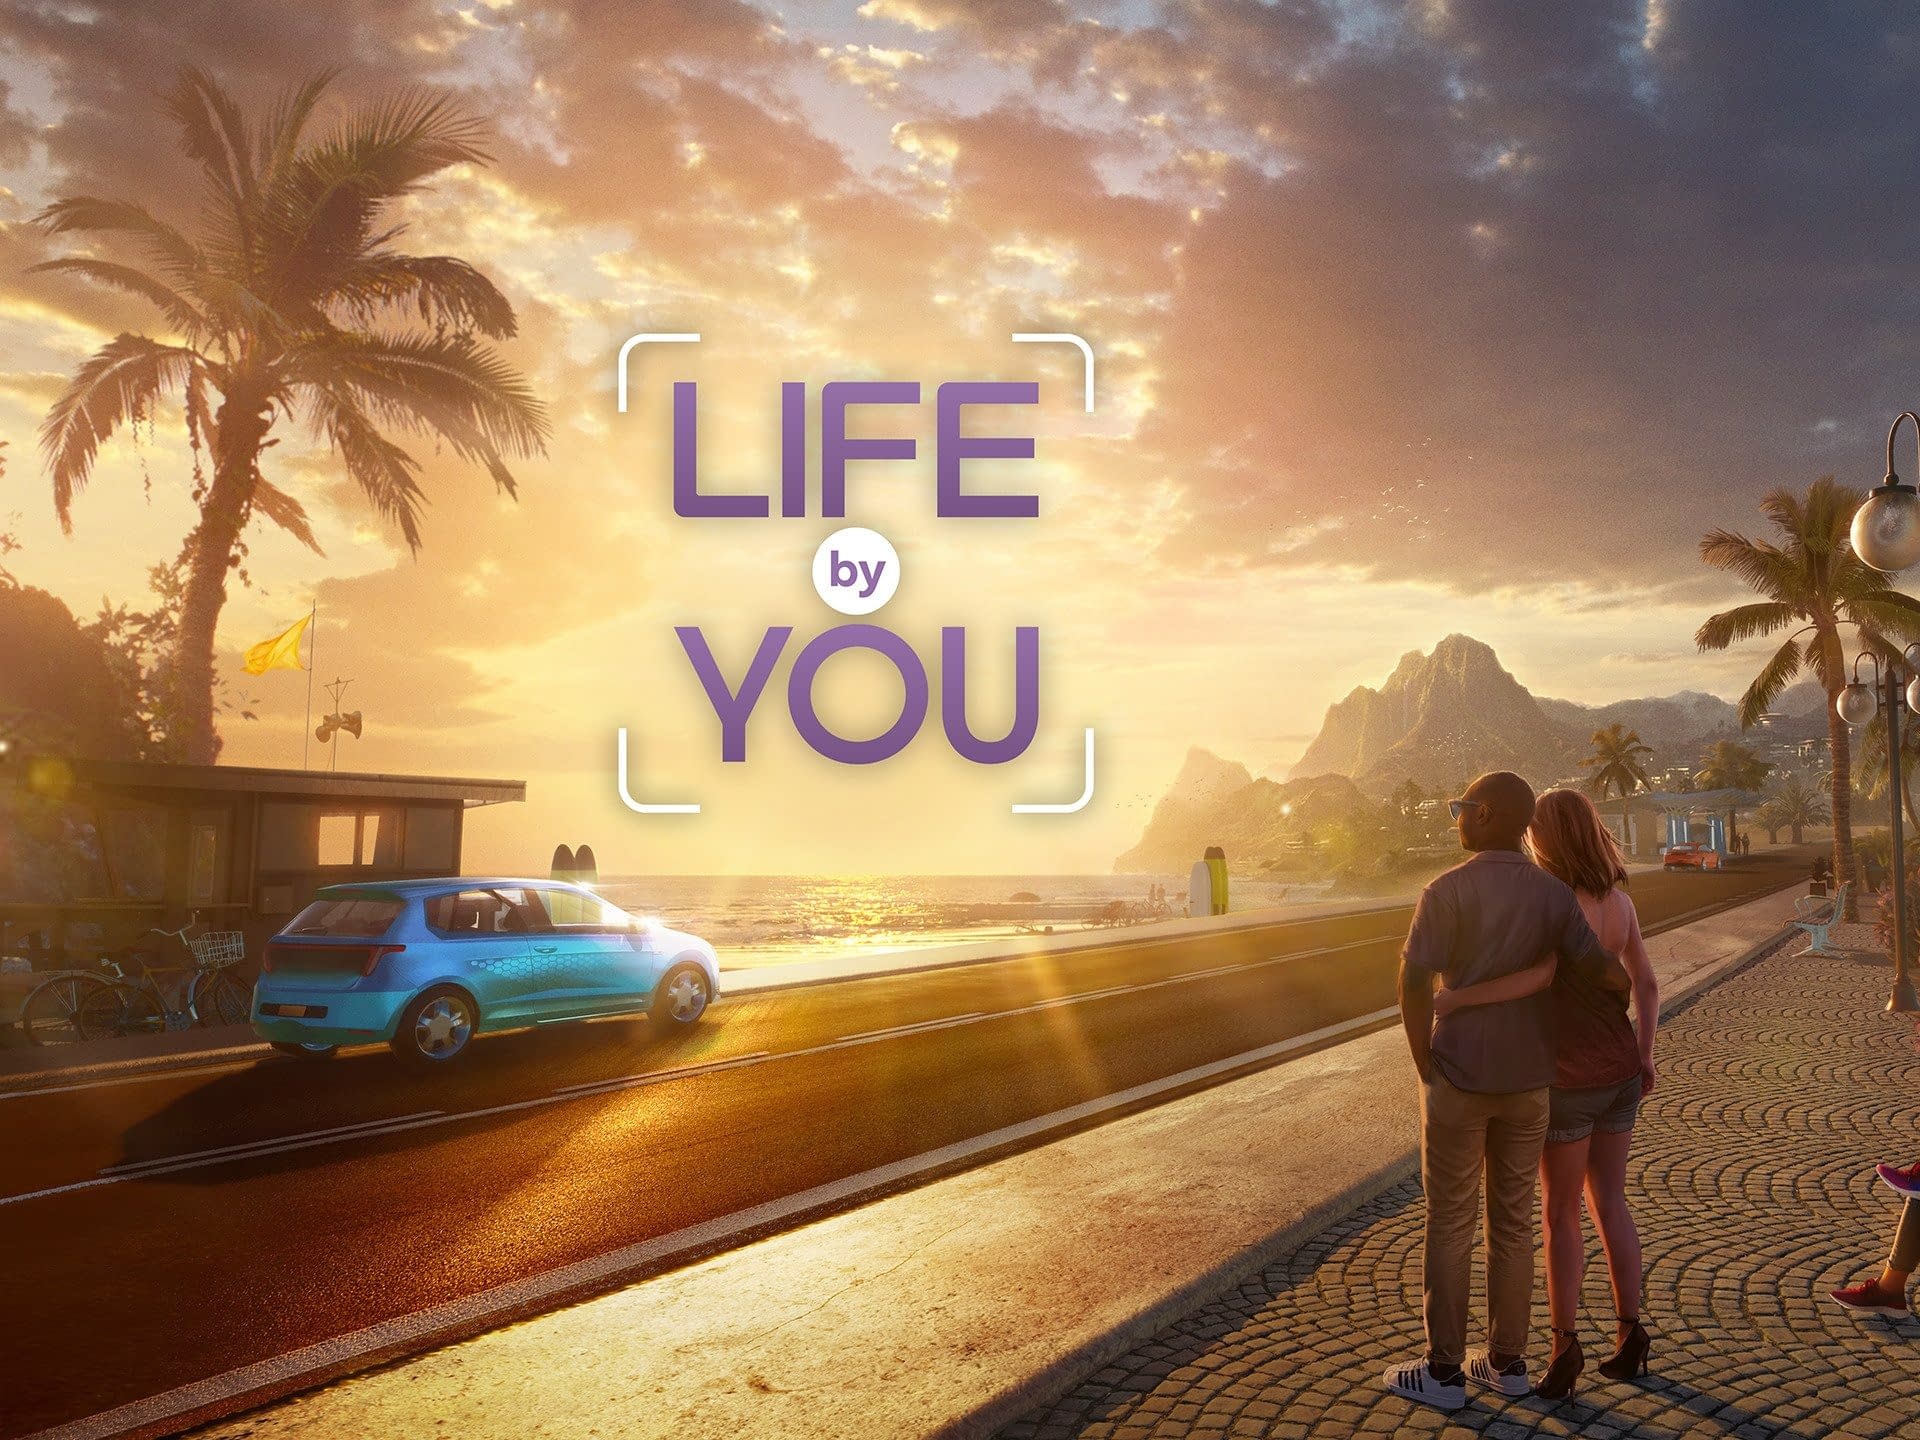 The Sims like Life by Yu announced the release date